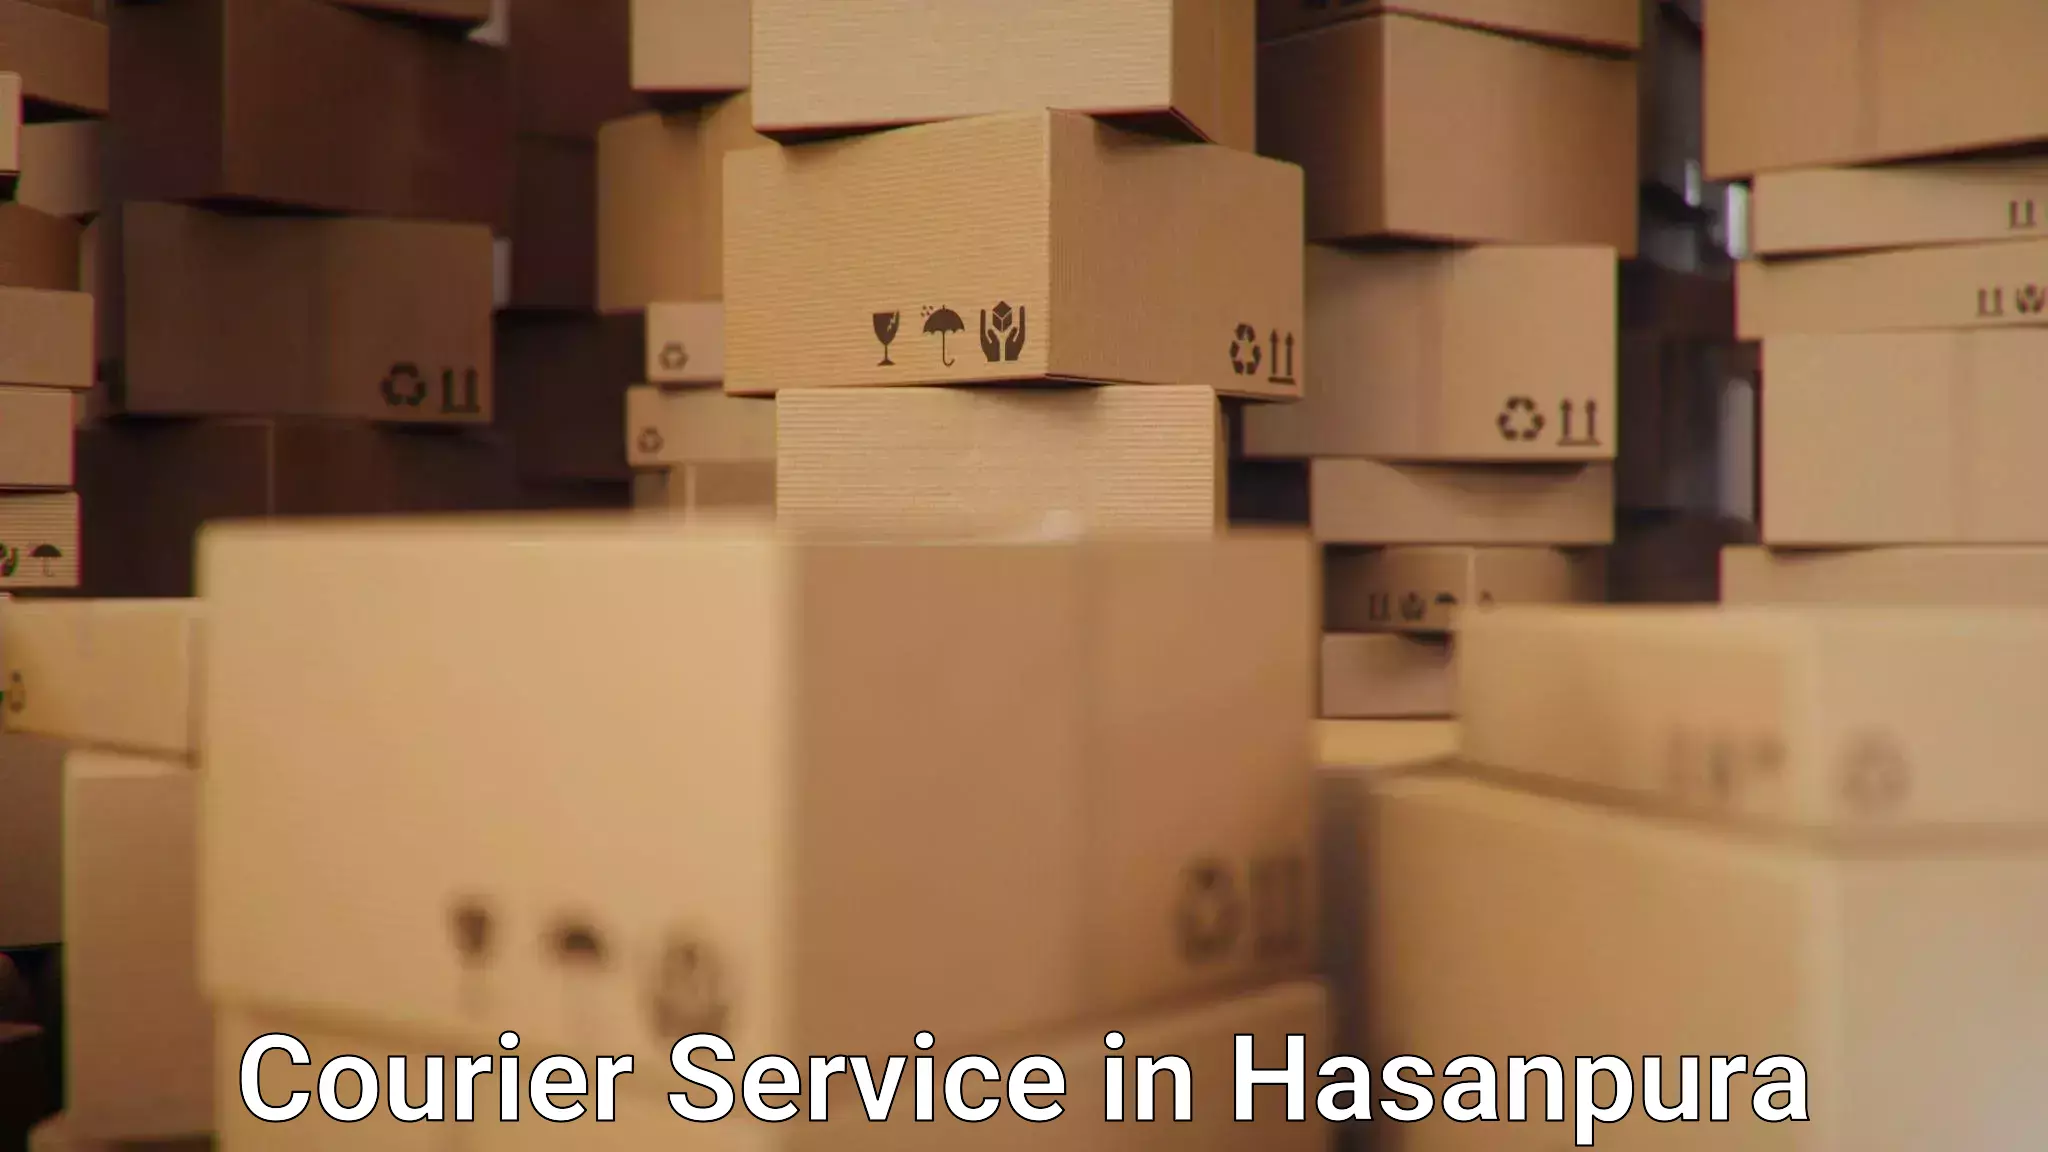 Affordable shipping rates in Hasanpura